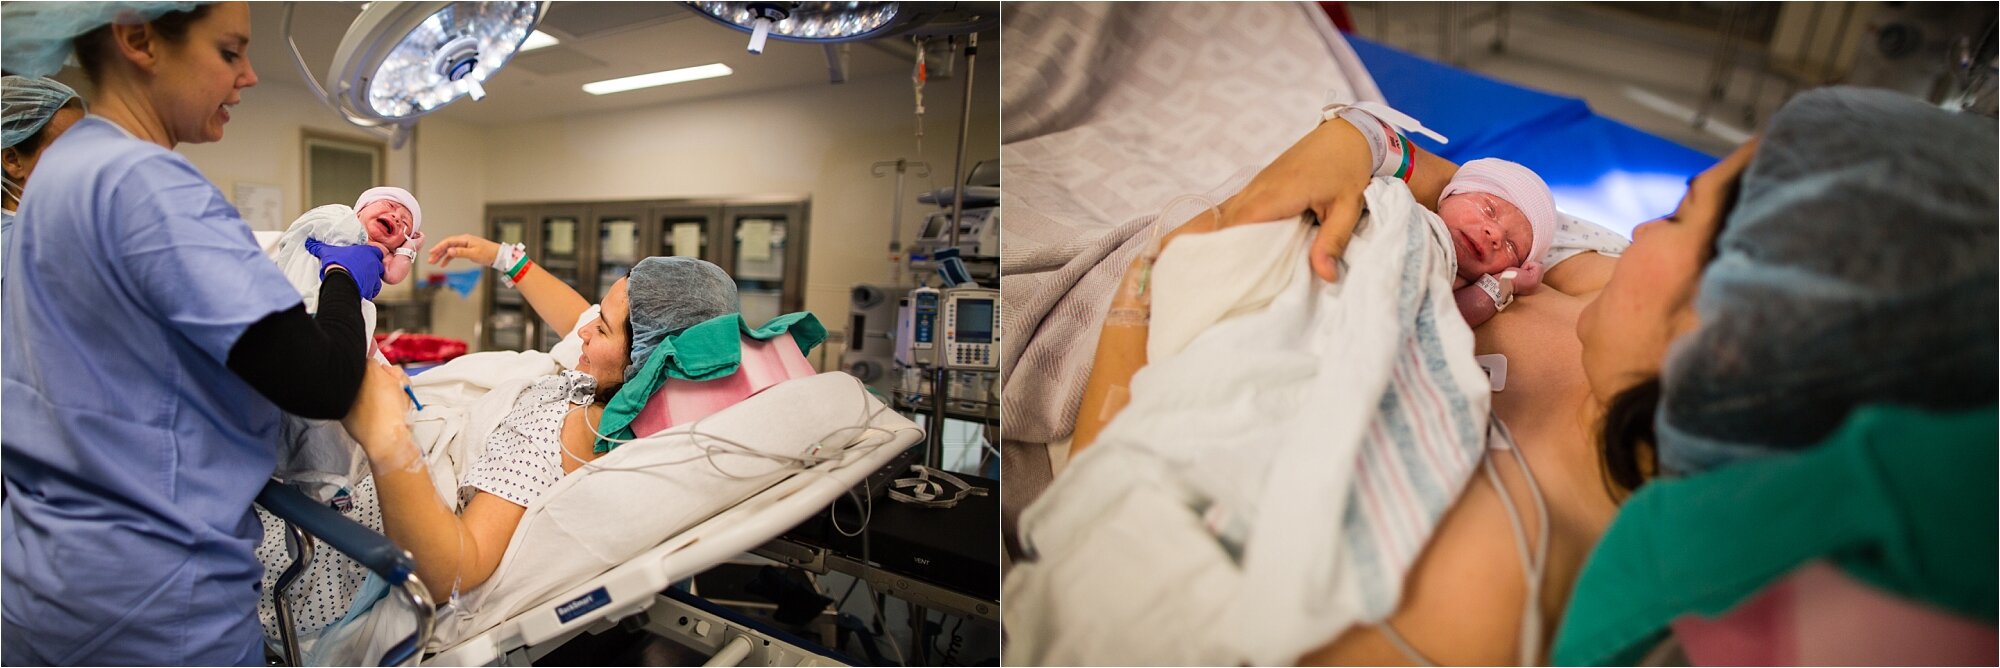 Nurse hands new baby to mom, skin to skin for the first time after being born c-section, Philadelphia Birth Photographer